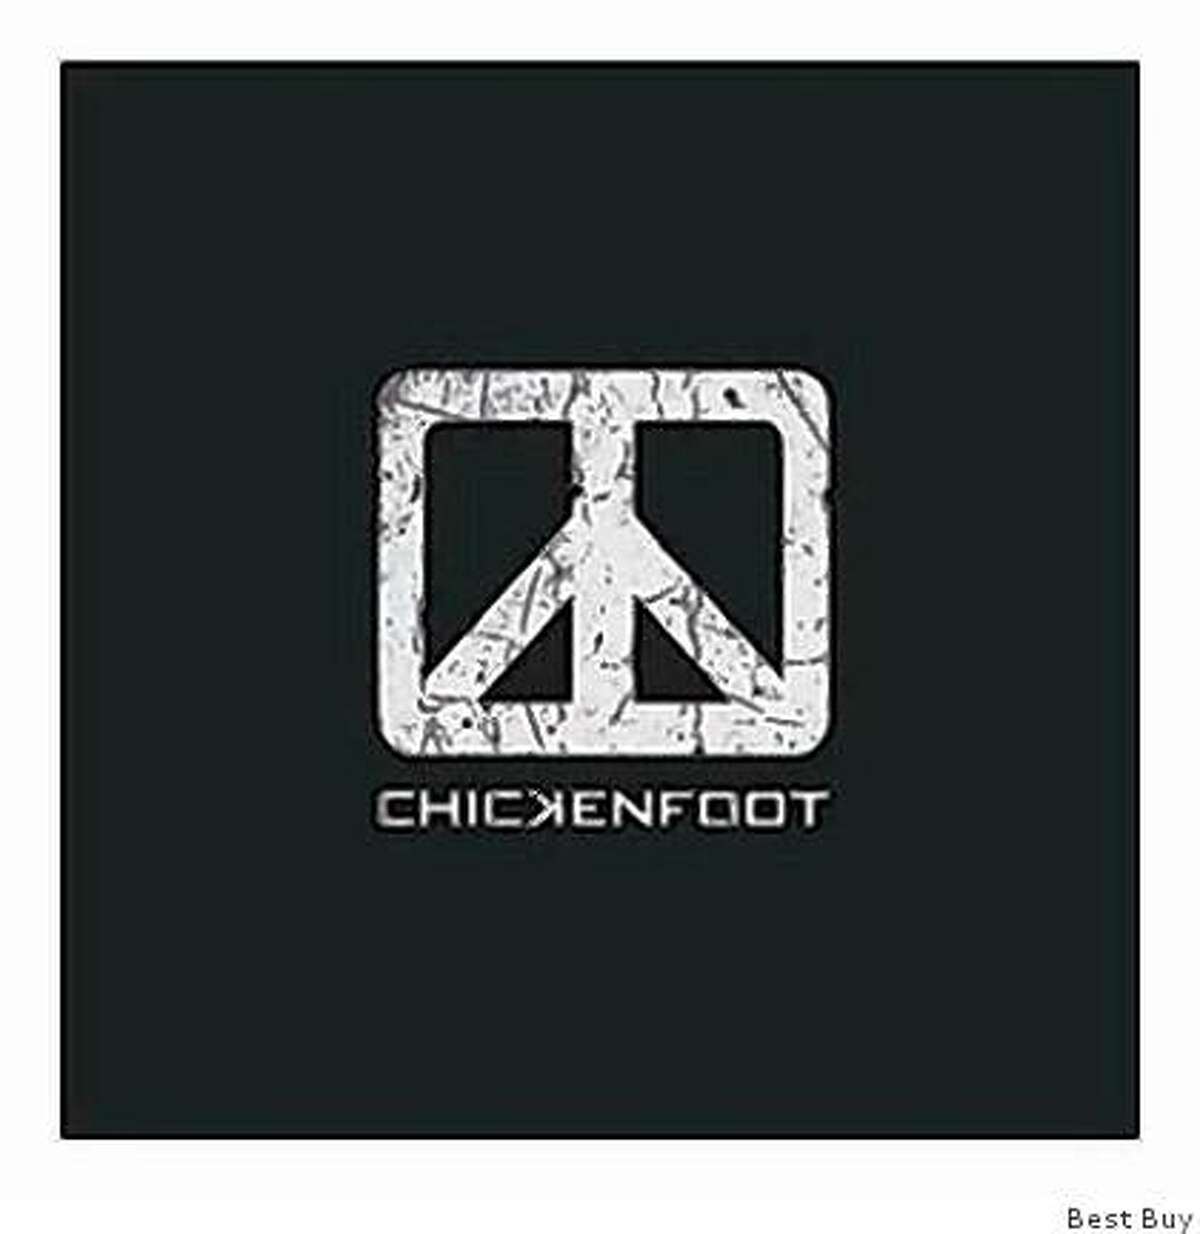 CD cover of "Chickenfoot."